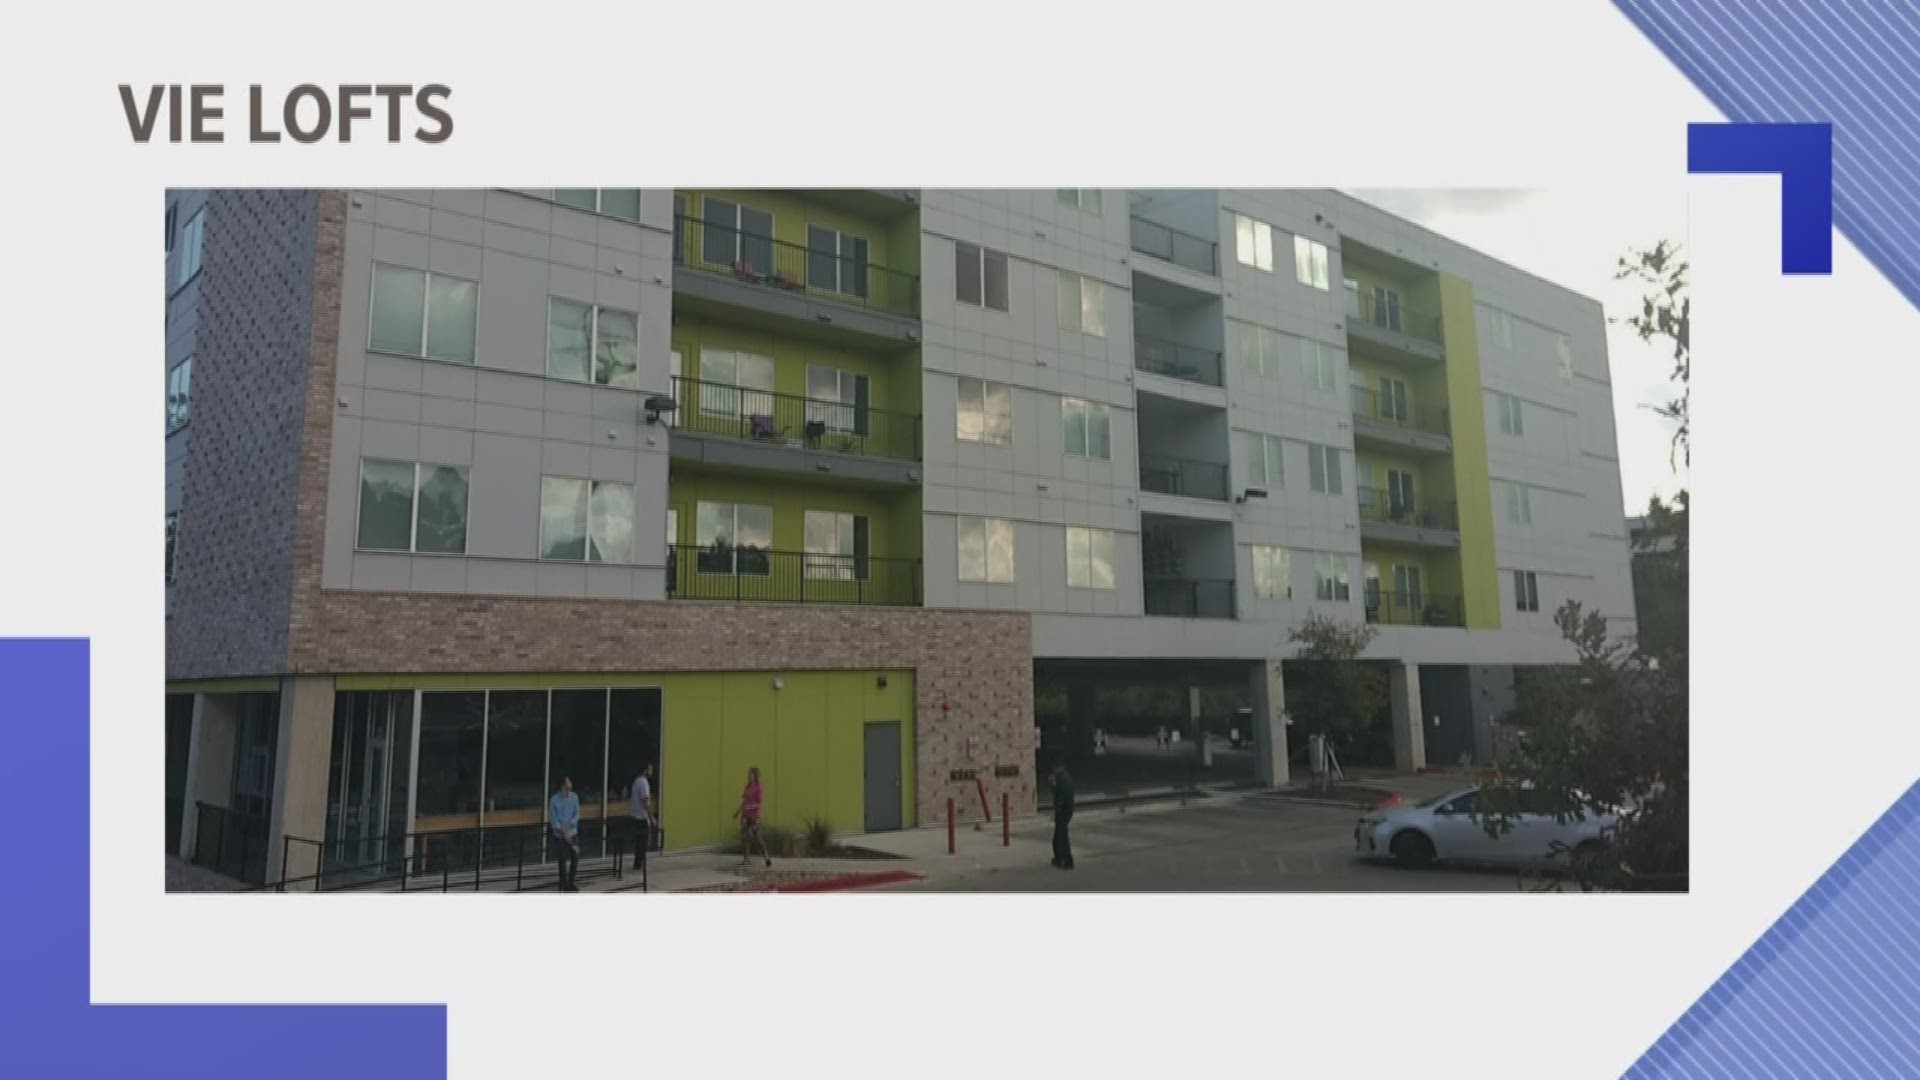 One-hundred-sixty-two people are out of their apartment building in San Marcos thanks to building safety concerns.